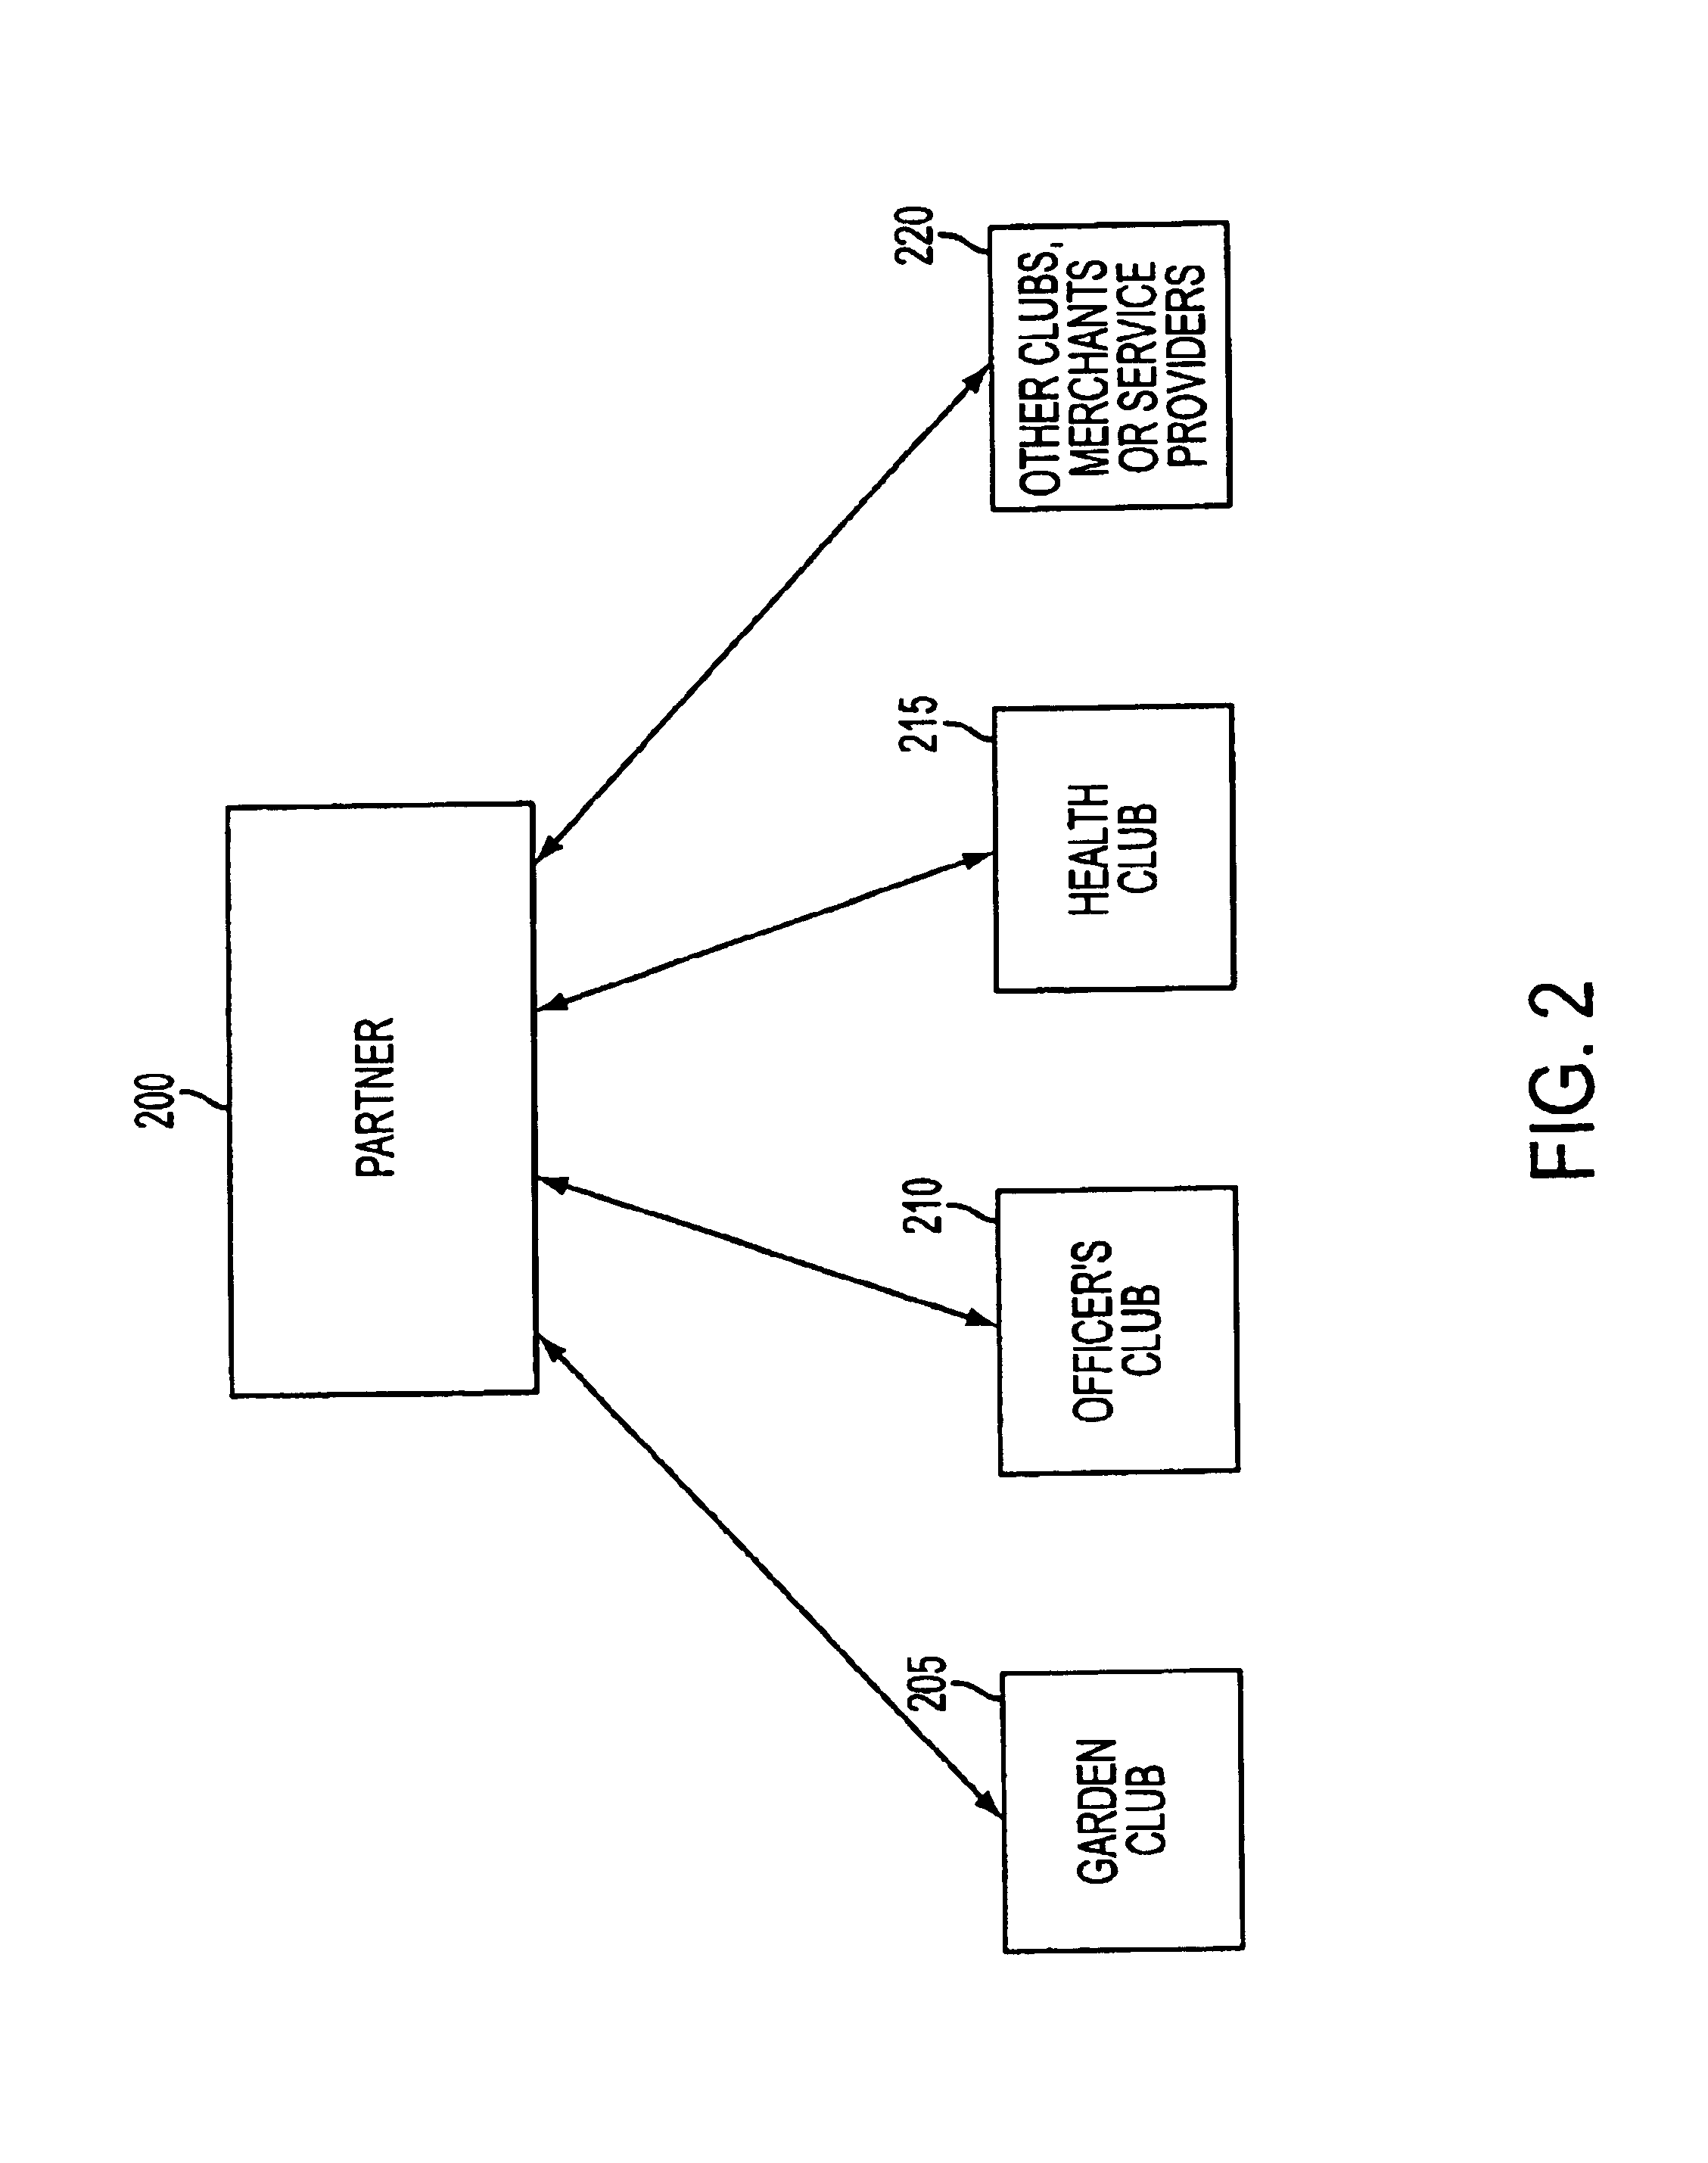 Credit instrument and system with automated payment of club, merchant, and service provider fees